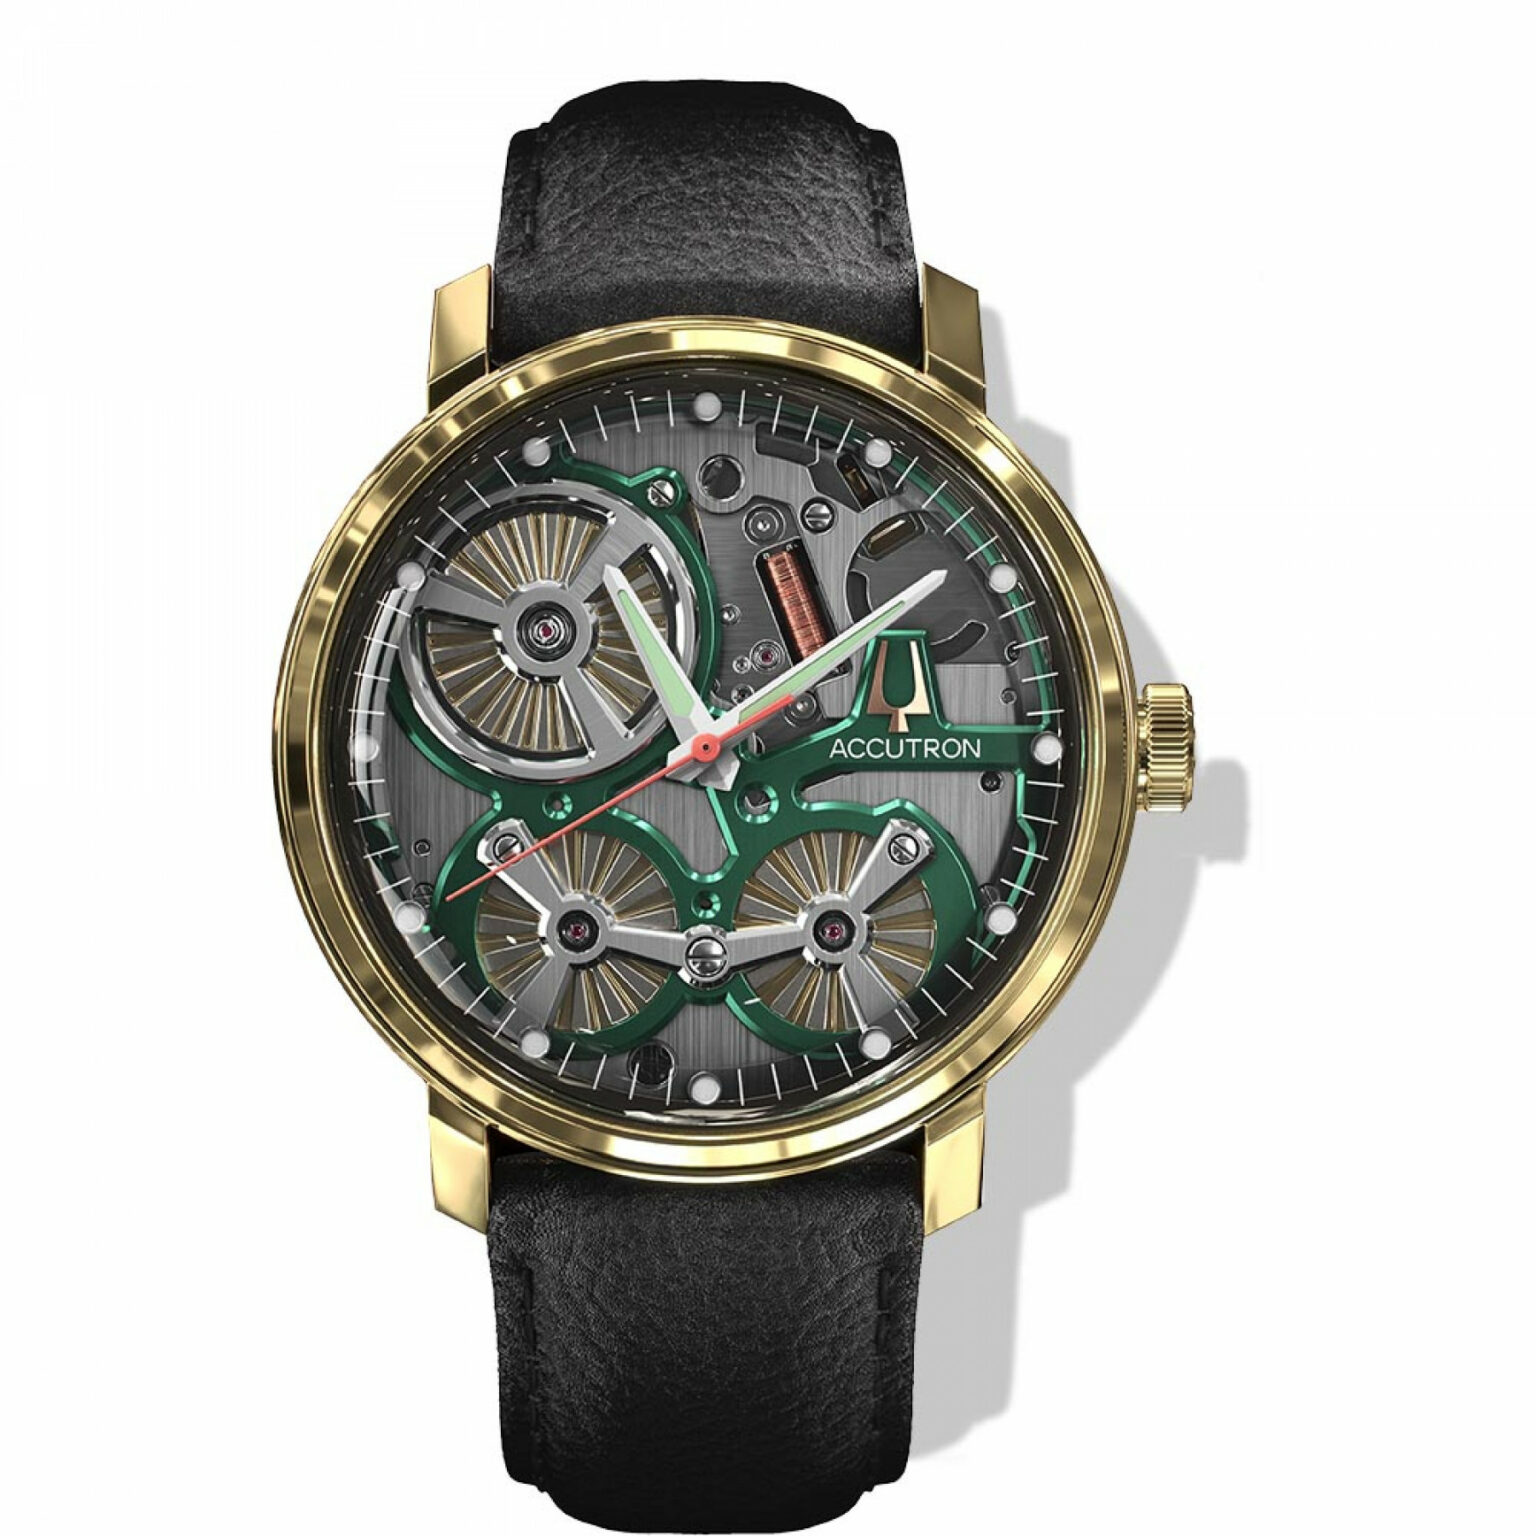 Accutron Spaceview 2020 Yellow Gold Limited Edition